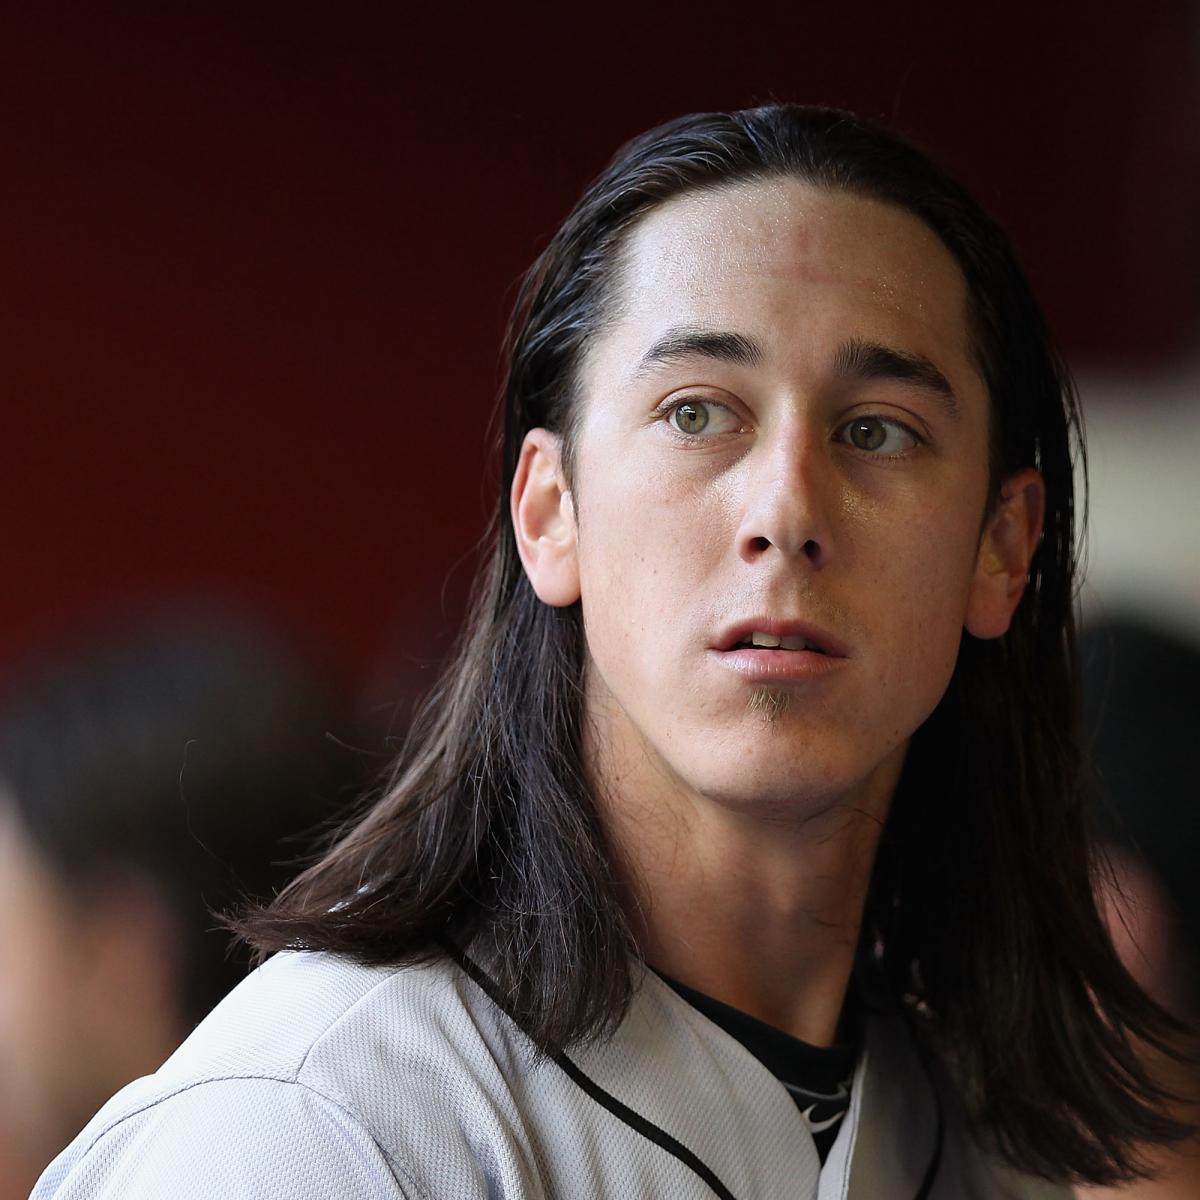 Paul Sporer on X: Heading into 2010, Tim Lincecum was coming off